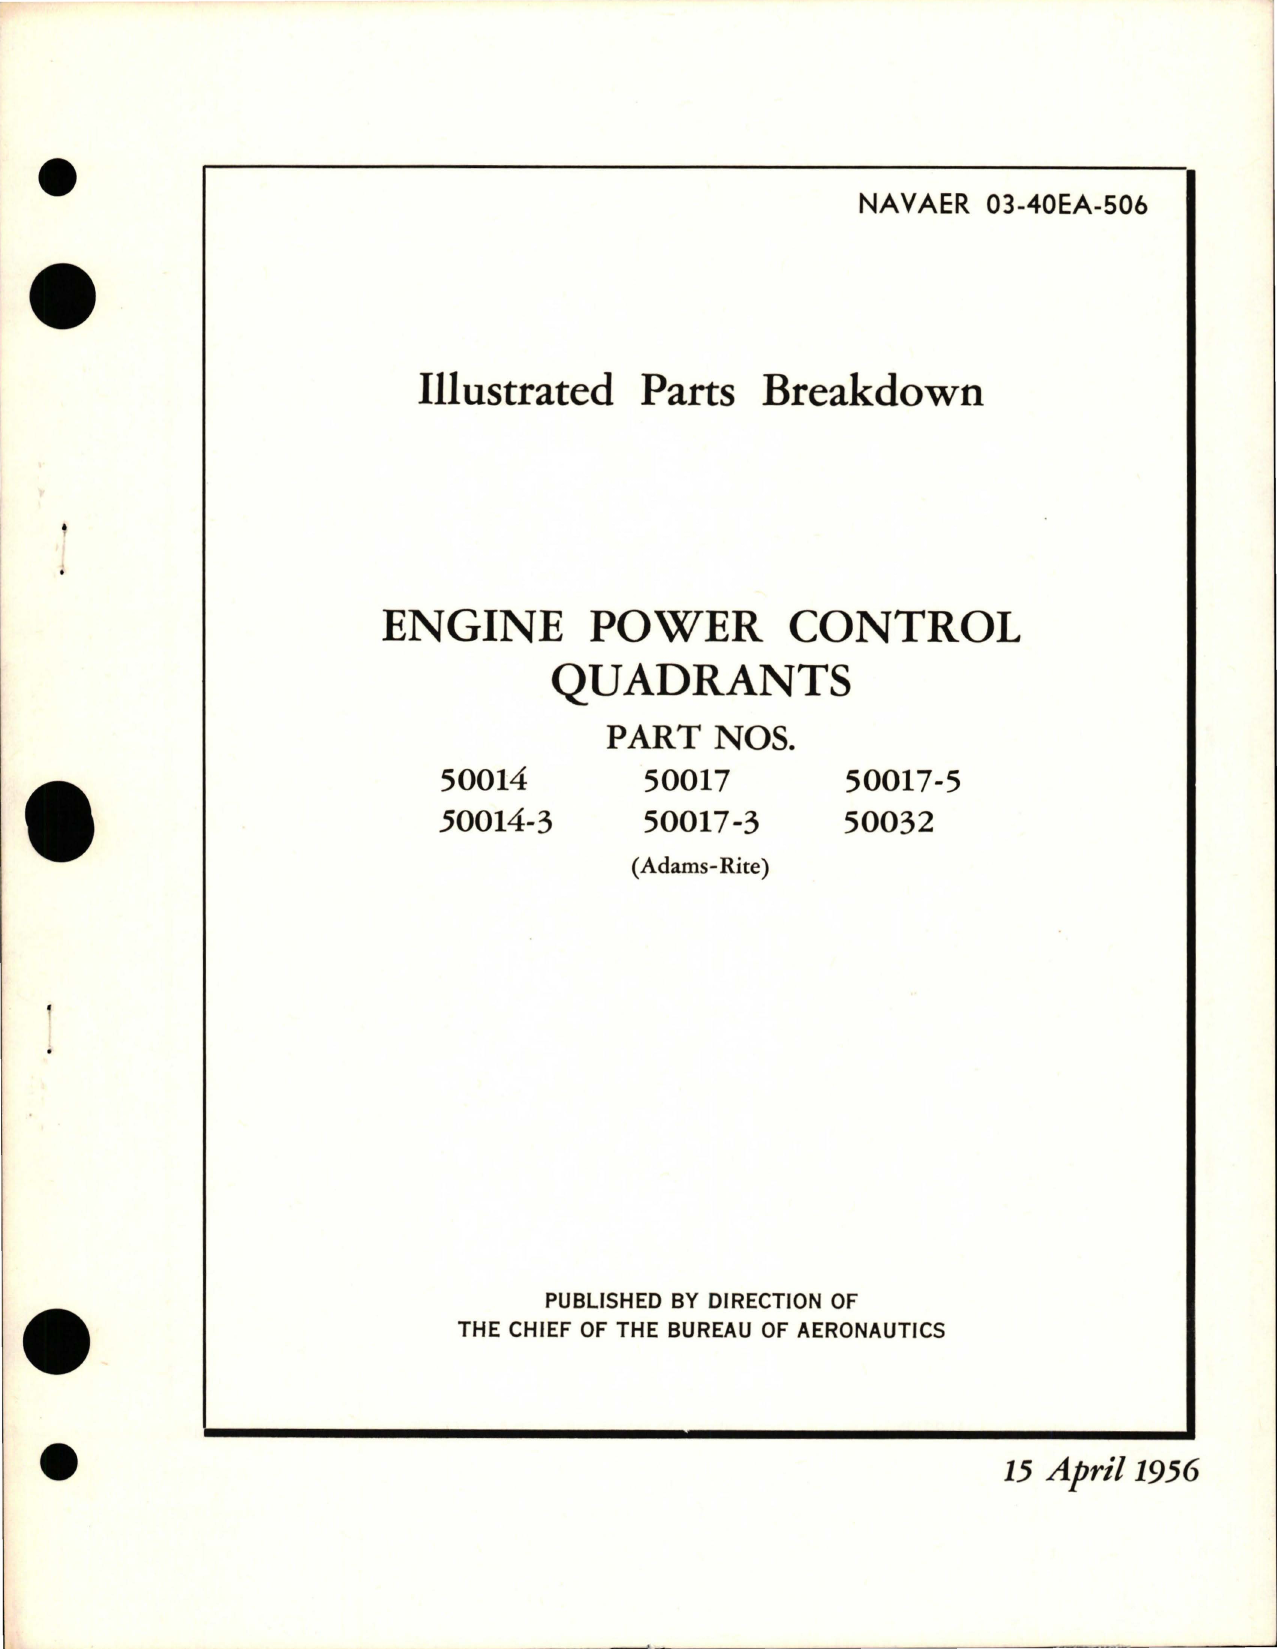 Sample page 1 from AirCorps Library document: Illustrated Parts Breakdown for Engine Power Control Quadrants - Parts 50014, 50014-3, 50017, 50017-3, 50017-5, and 50032